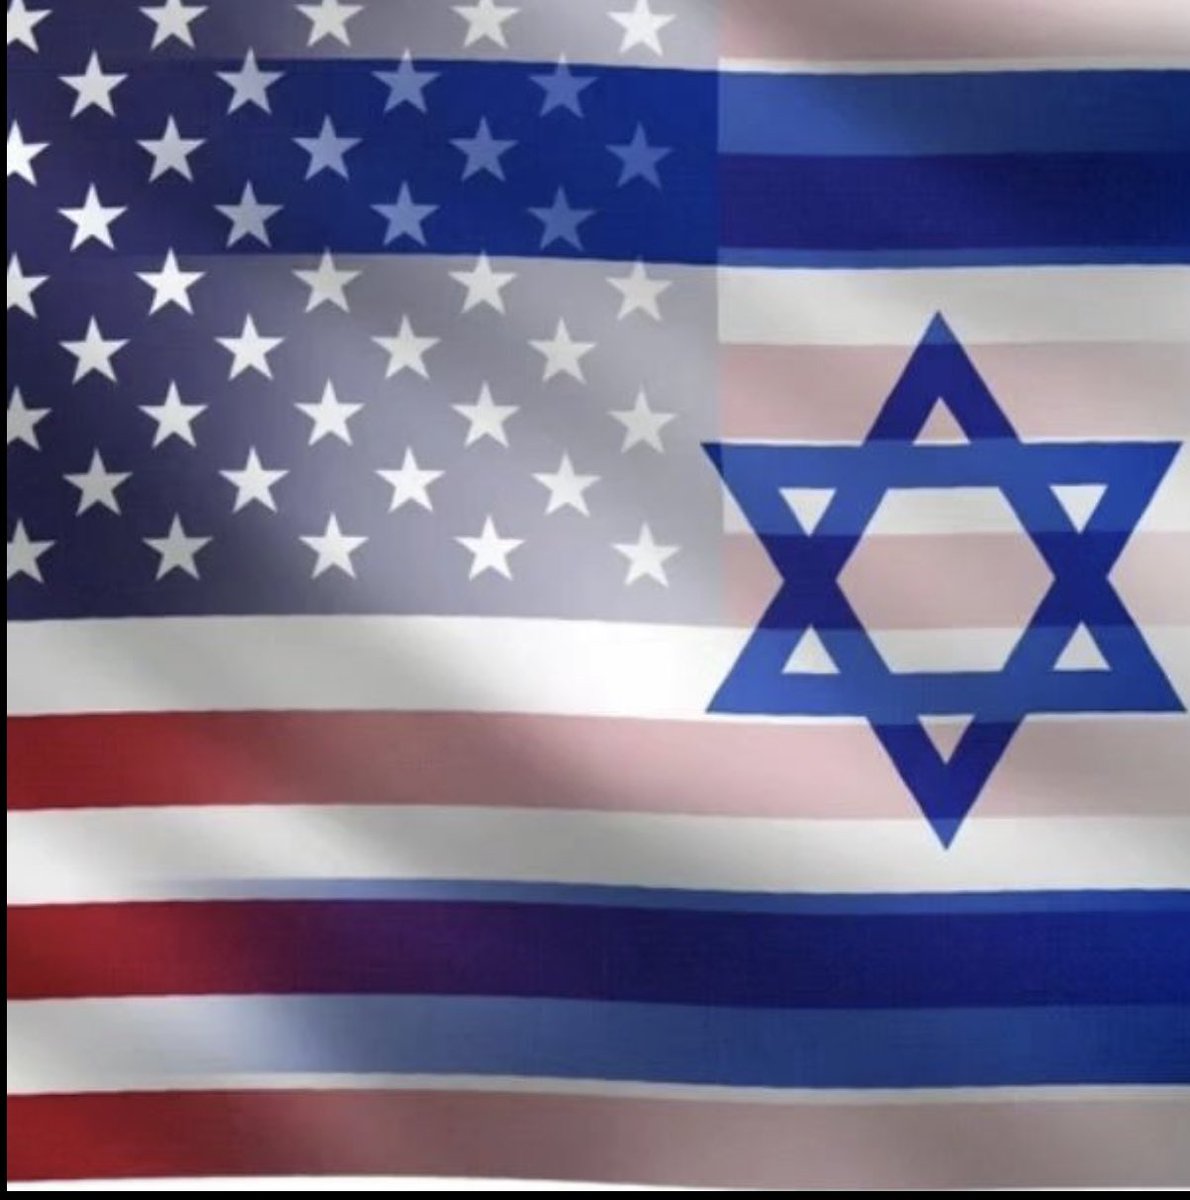 Our brothers and sisters the whole house of Israel, who are in distress and captivity who wander over sea and over land. 
Oh Lord have Mercy on #Israel 
#PrayersForIsrael 
#PrayersForGaza
#PrayersForPeace
#PrayersForJustice
May God have mercy on us, and bless us
#GodBlessAmerica